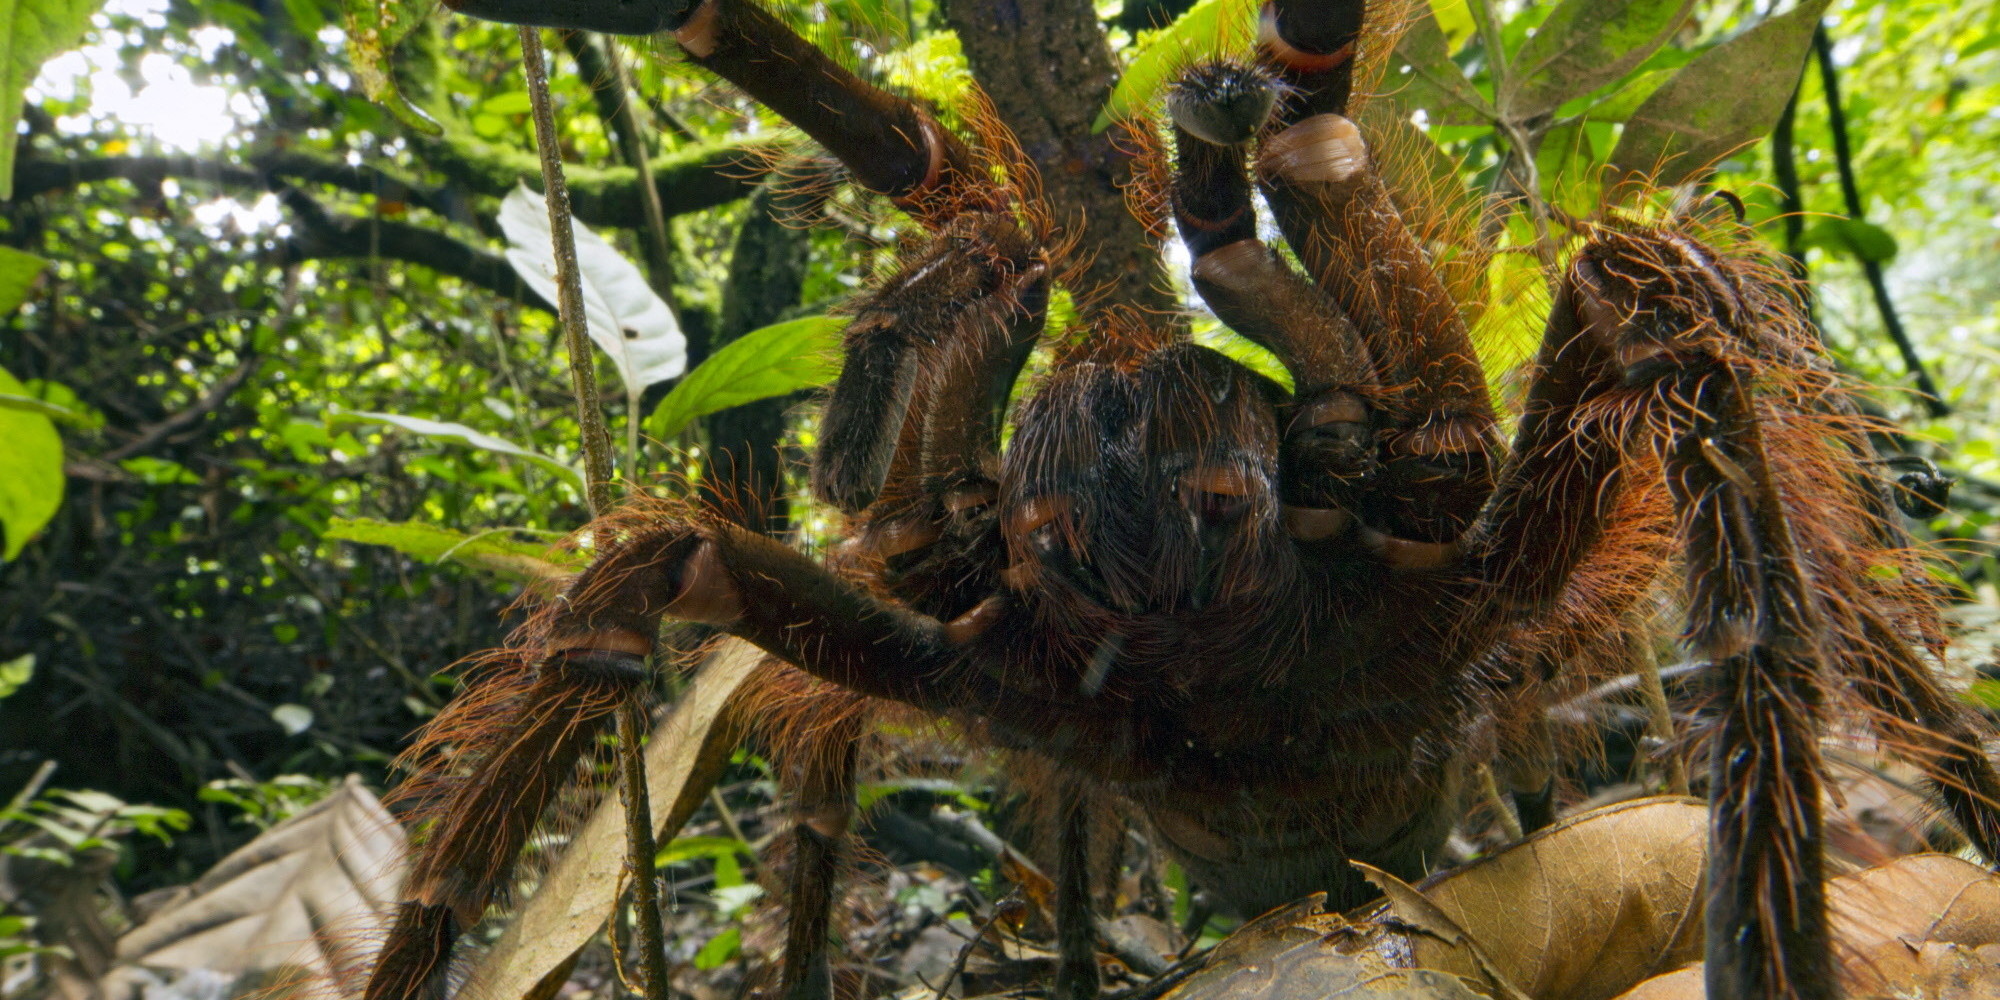 Puppy-Sized Spider Makes Us Want To Cuddle (PHOTOS) | HuffPost